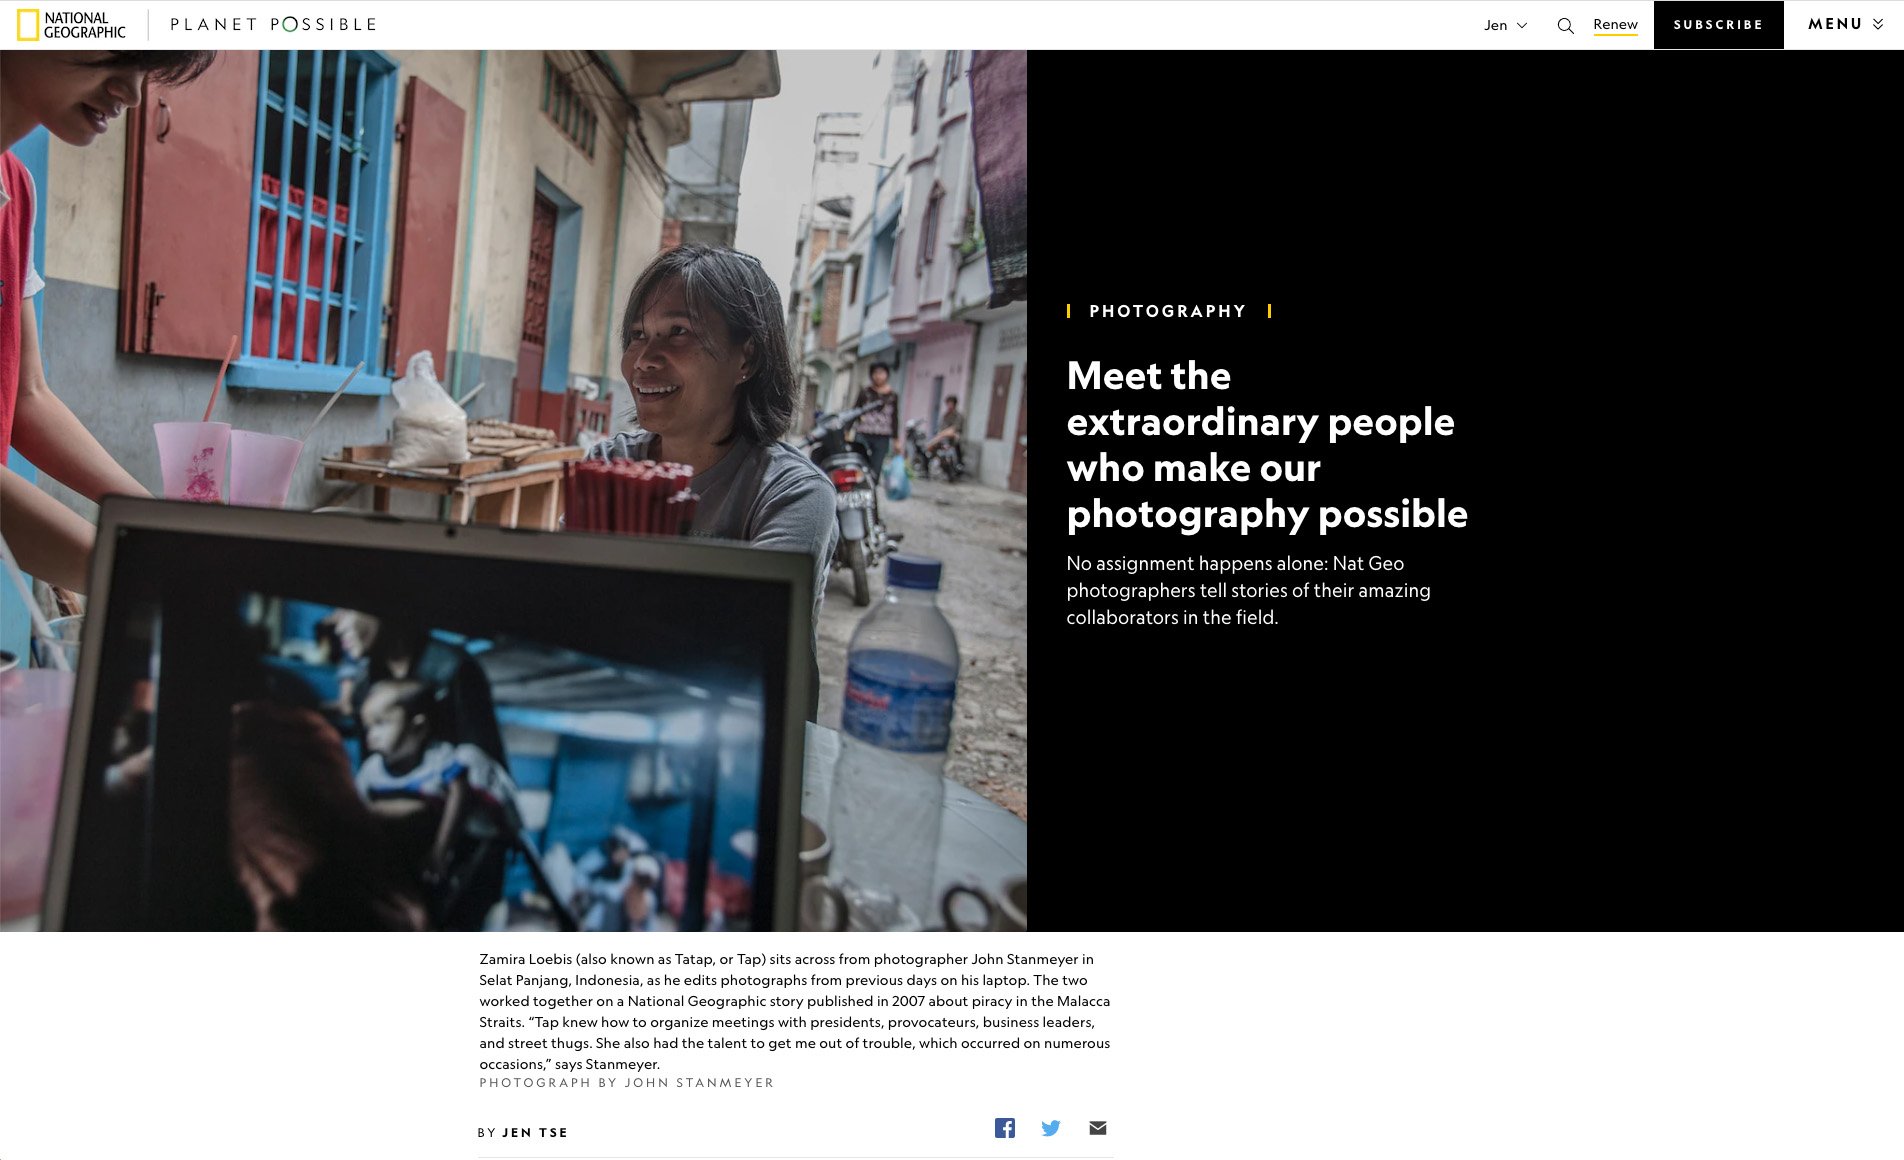  Multi-platform project celebrating the diverse collaborators behind the scenes and in the field with Nat Geo photographers (local producers, assistants, drivers, translators, and others). Article and photo edit by Jen Tse. Photographs by John Stanme